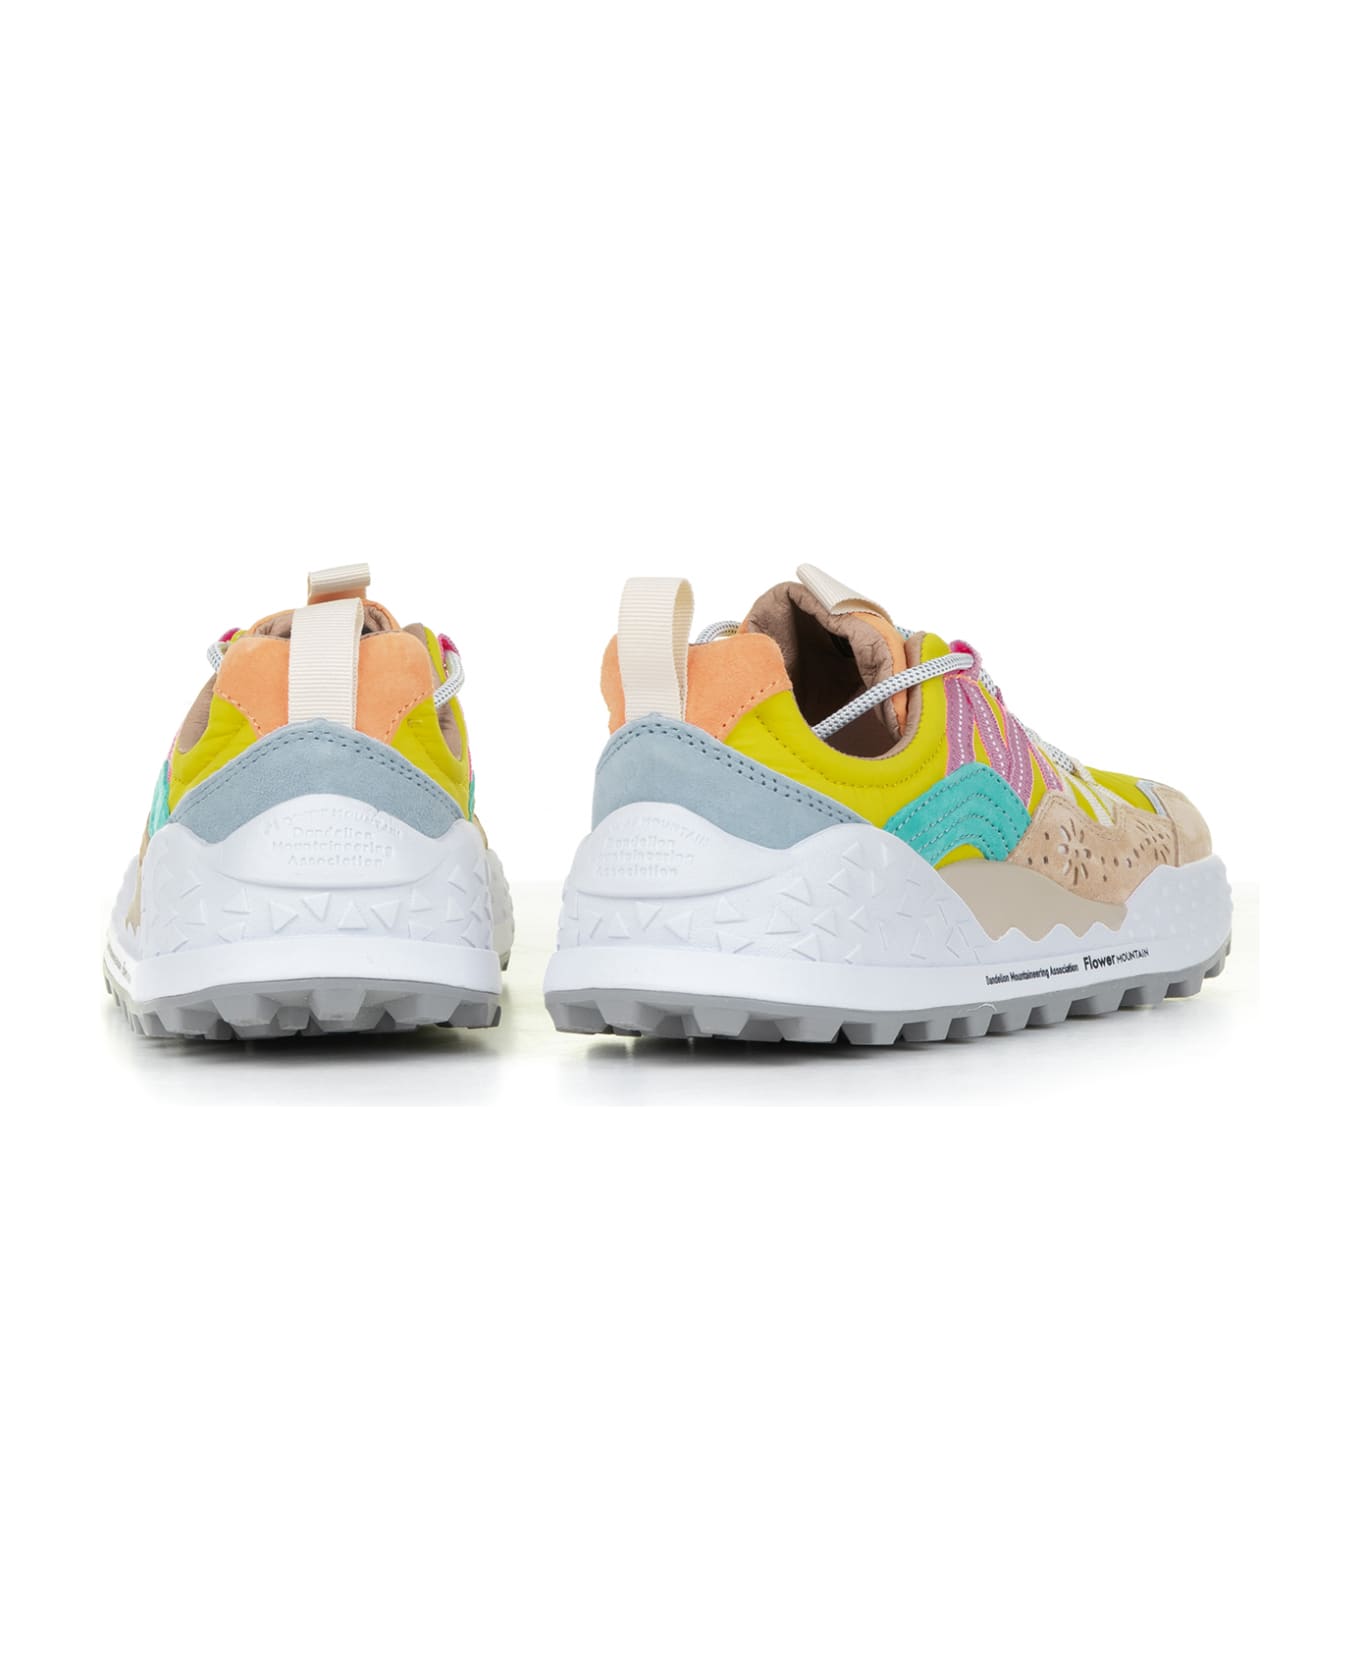 Flower Mountain Multicolored Washi Sneakers In Suede And Nylon - BEIGE YELLOW スニーカー